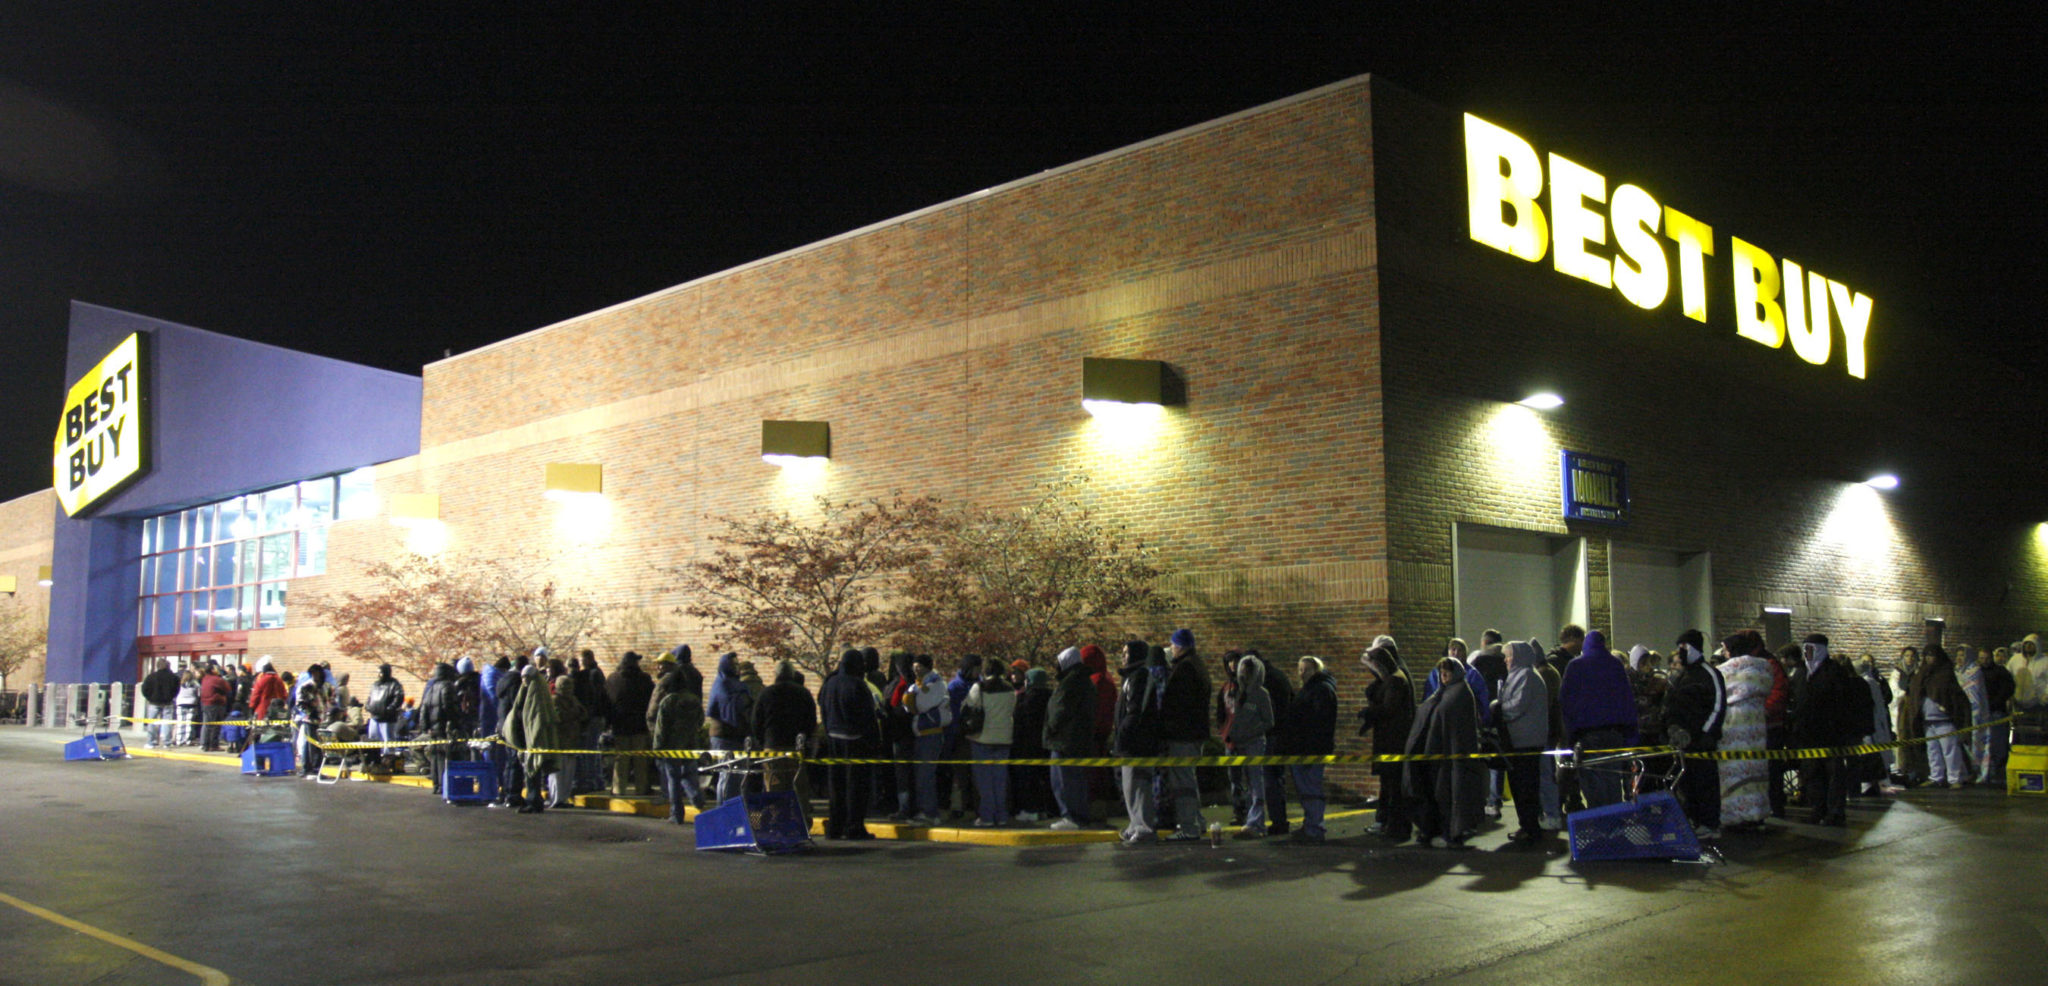 Here’s How Best Buy Could’ve Avoided Their ‘Serial’ Twitter Gaffe